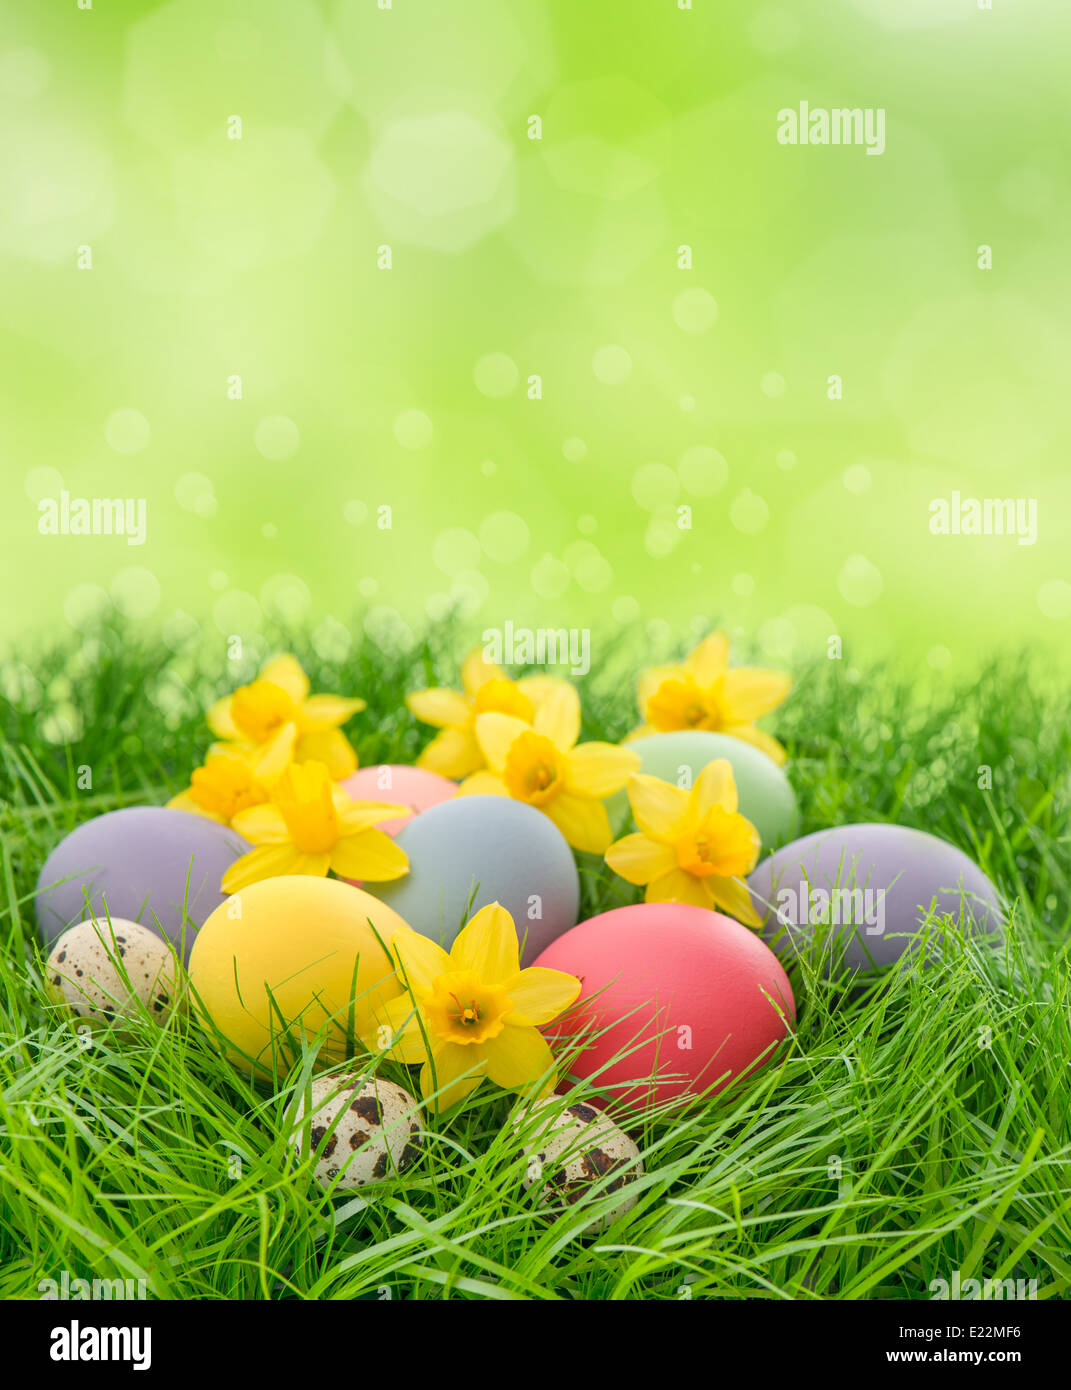 easter eggs and daffodils flowers in grass over green blurred background Stock Photo